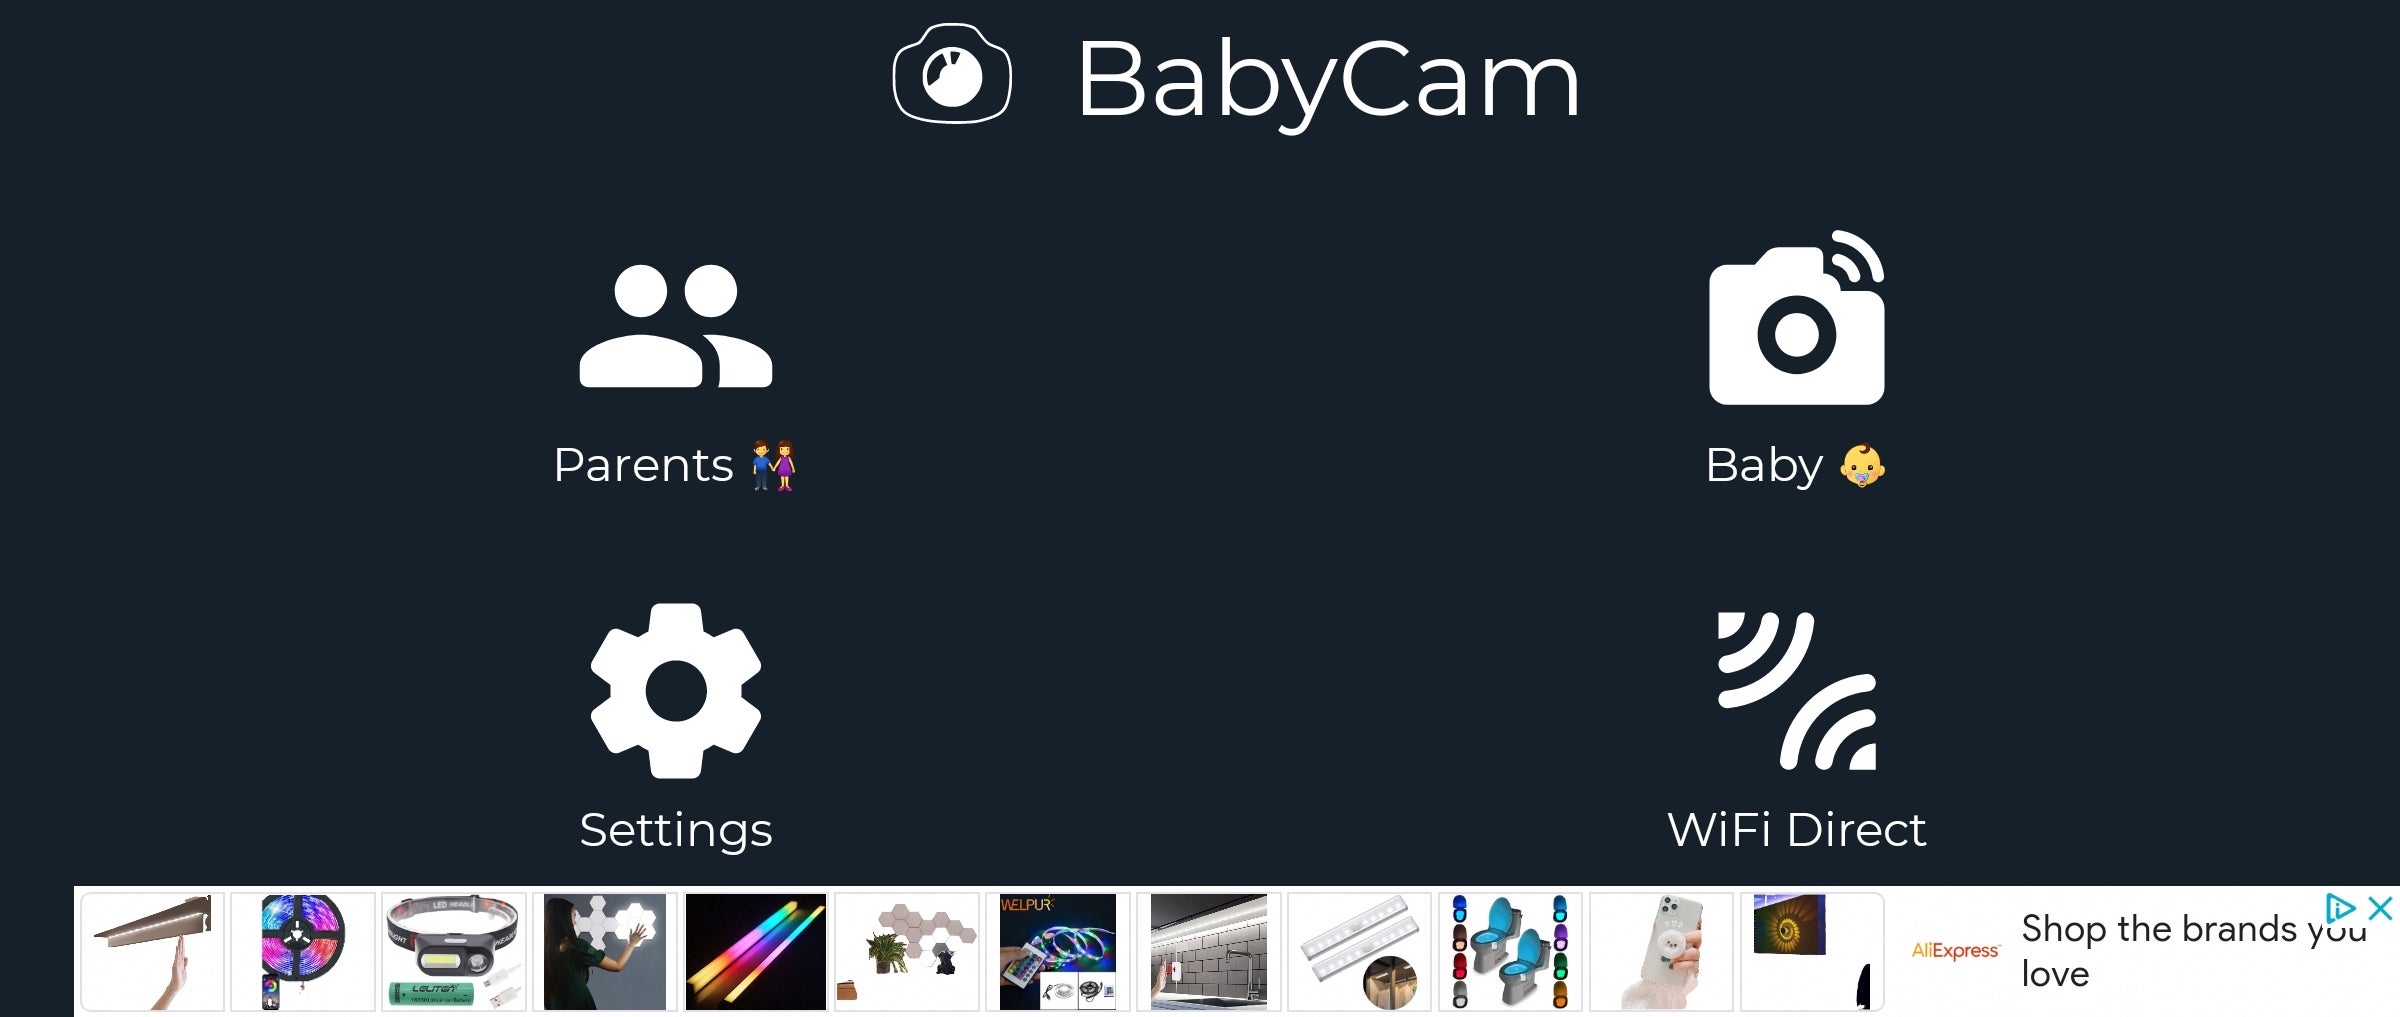 The main BabyCam interface is as intuitive as it gets - How to use an Android phone as a security camera or a baby monitor